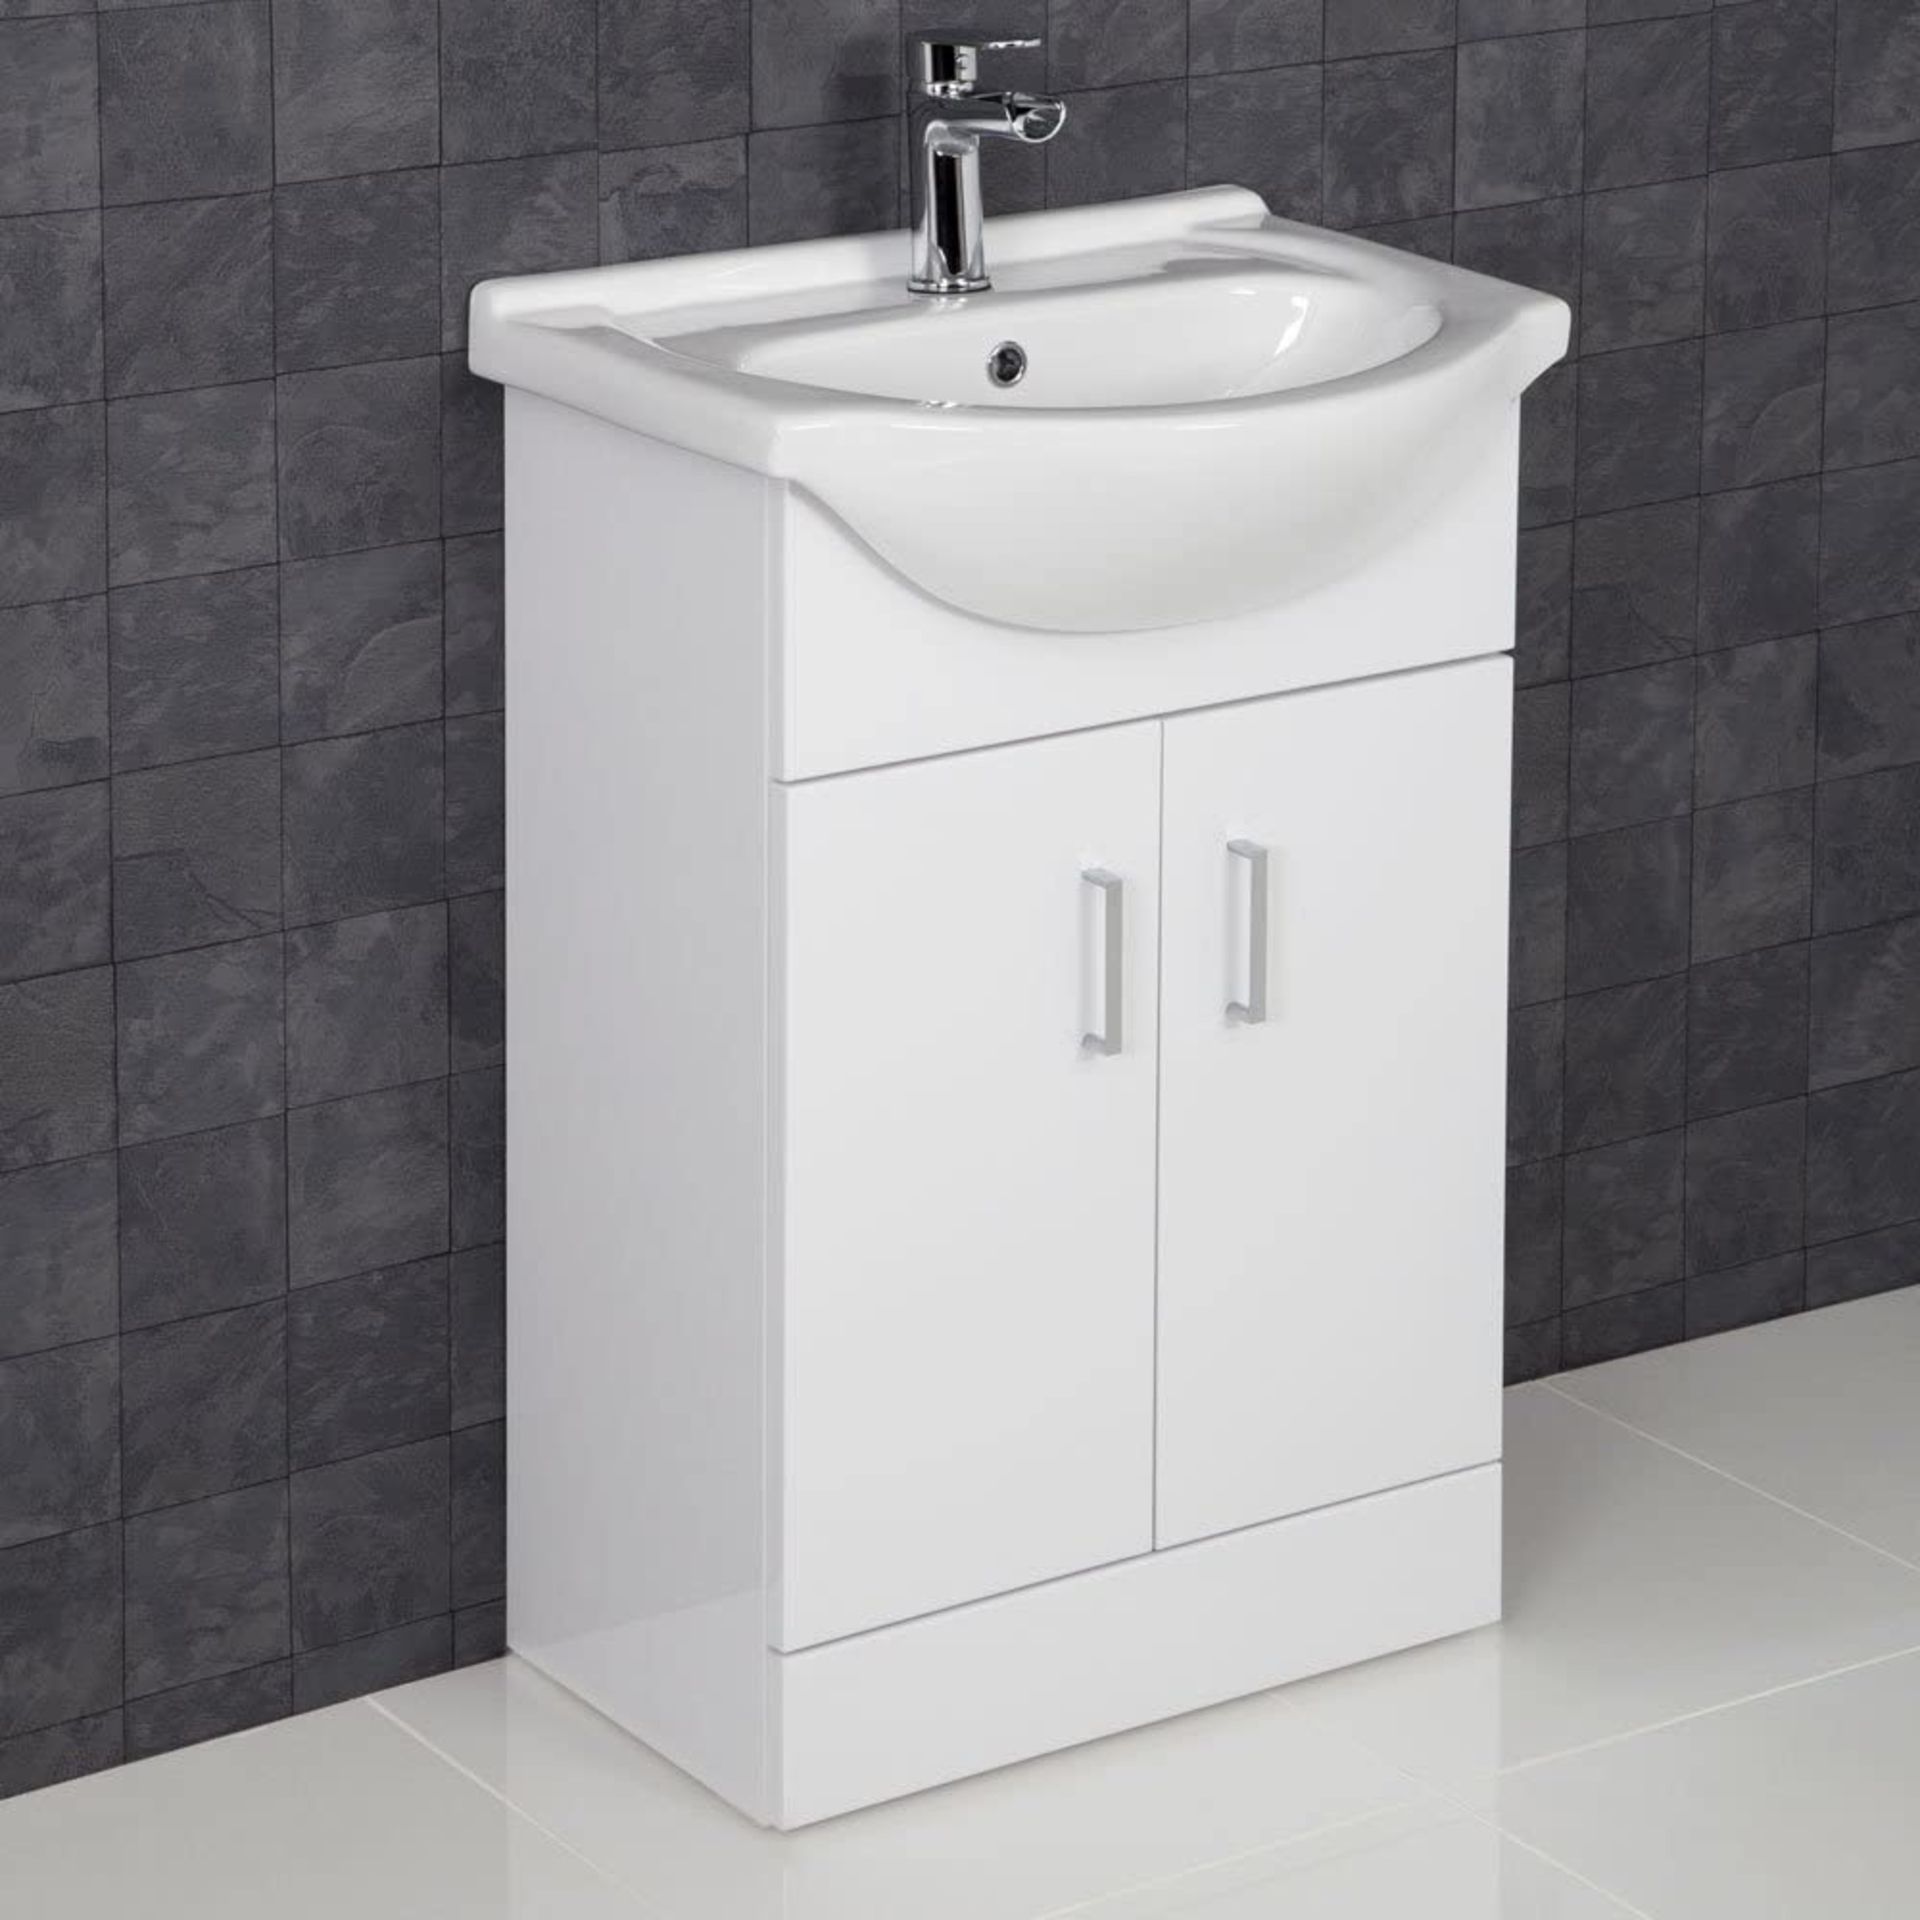 NEW (F182) Vista 550mm Cabinet with Basin White Gloss. RRP £343. The Vista 550mm Cabinet with...